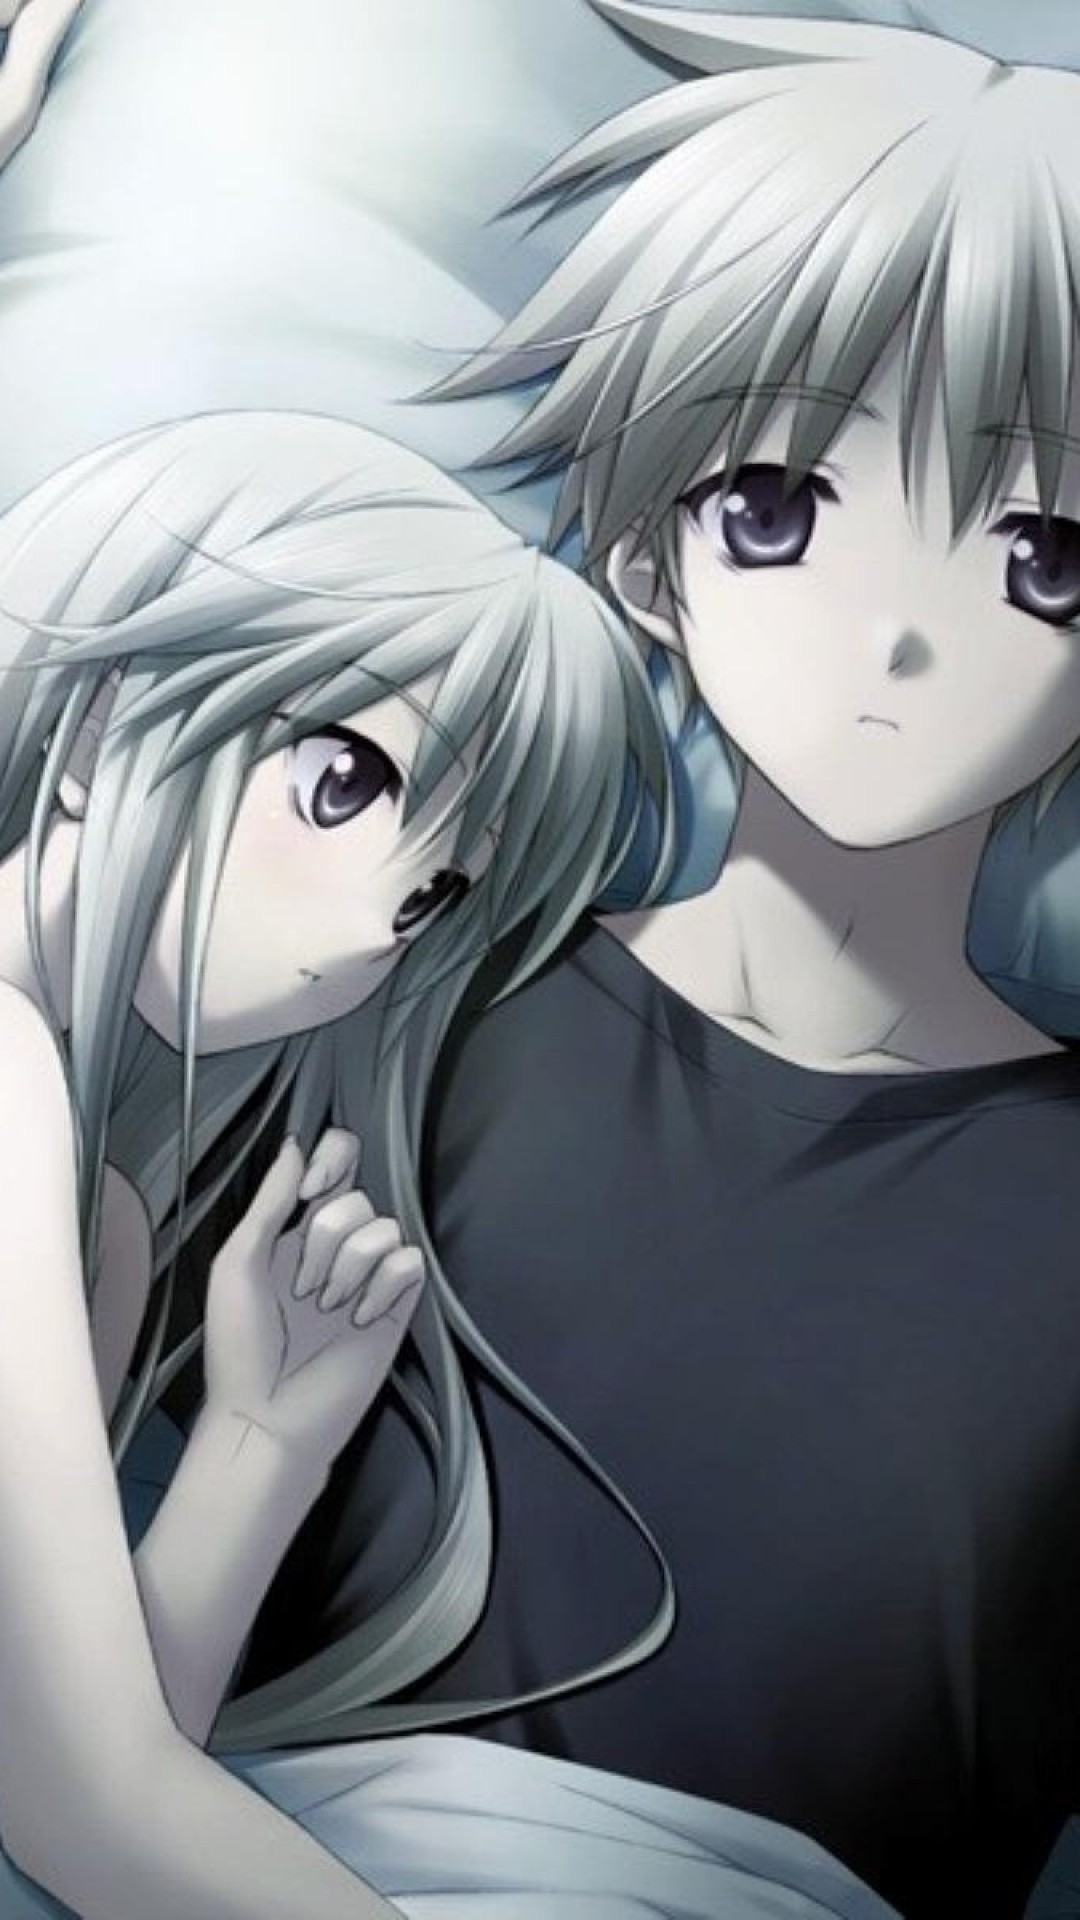 Anime Couple Wallpaper (74+ Images)